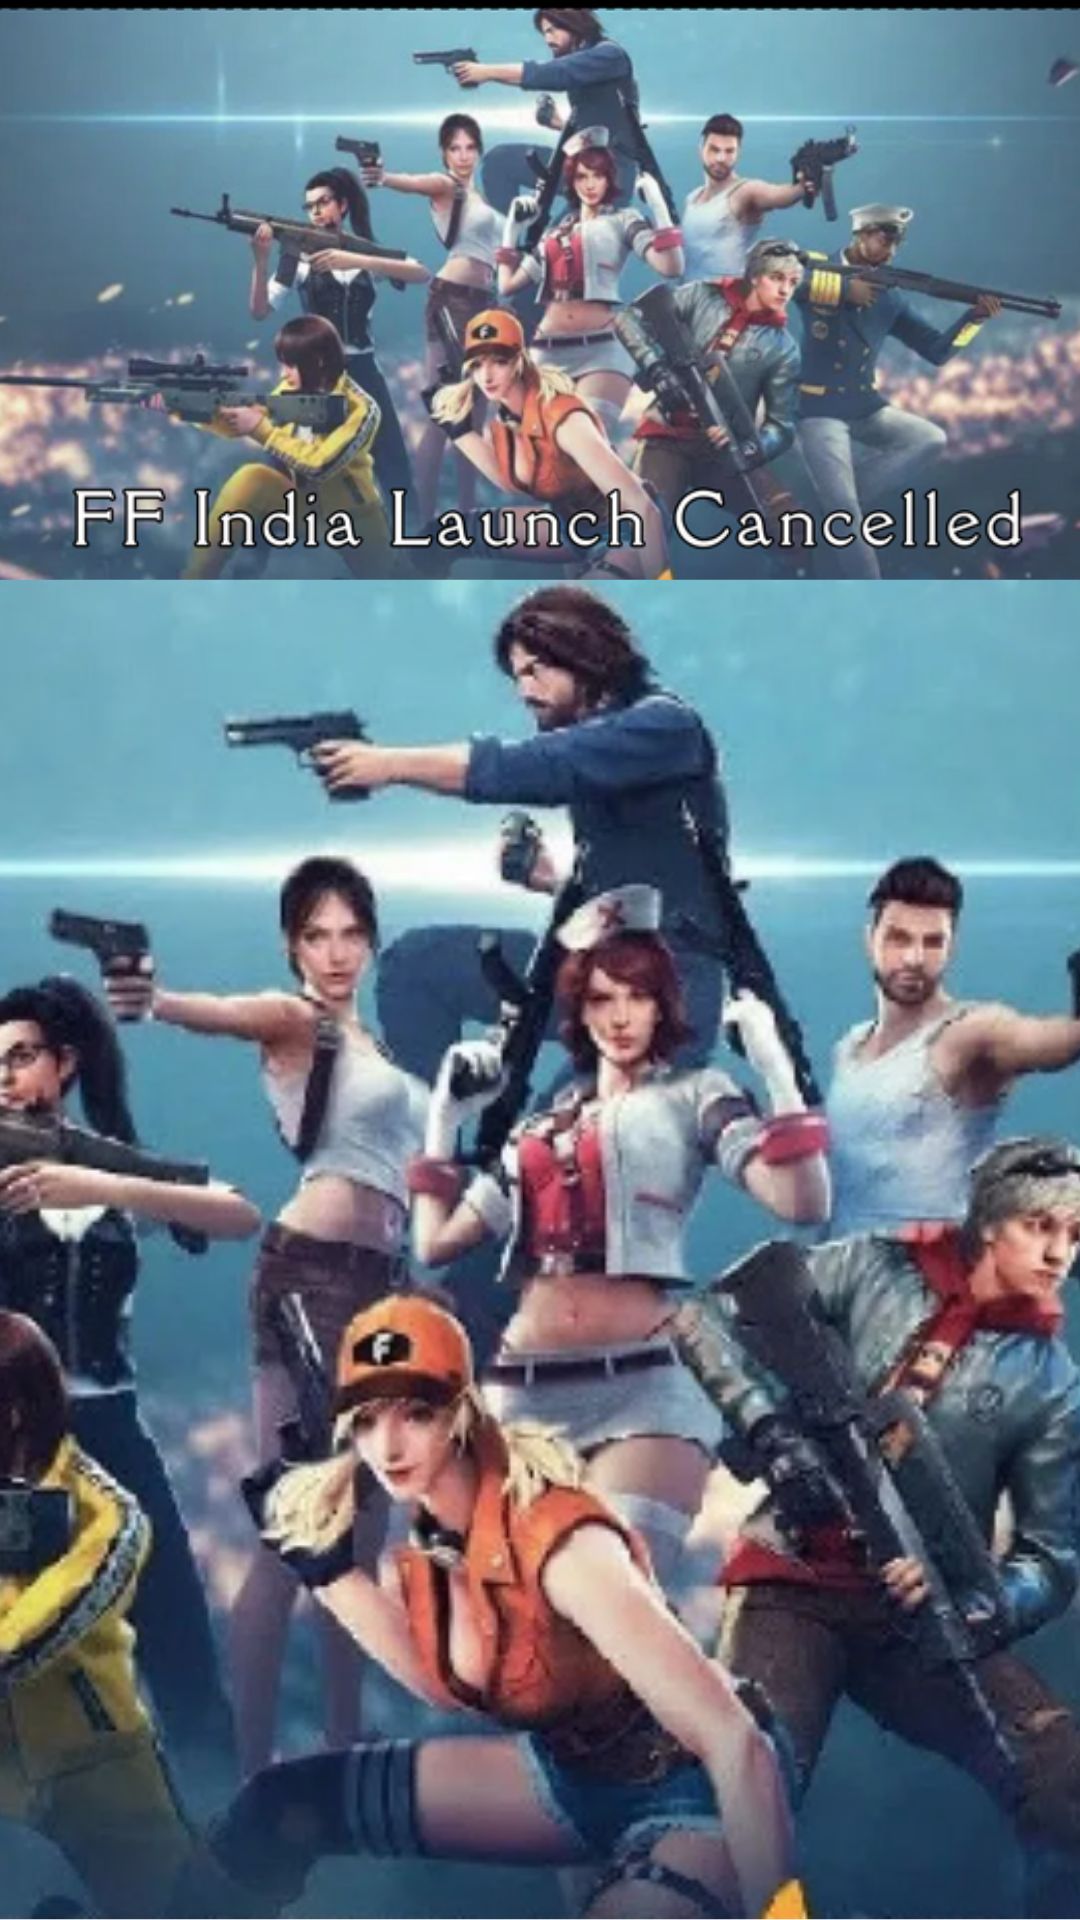 Garena Free Fire Returns To India On September 5: Here's